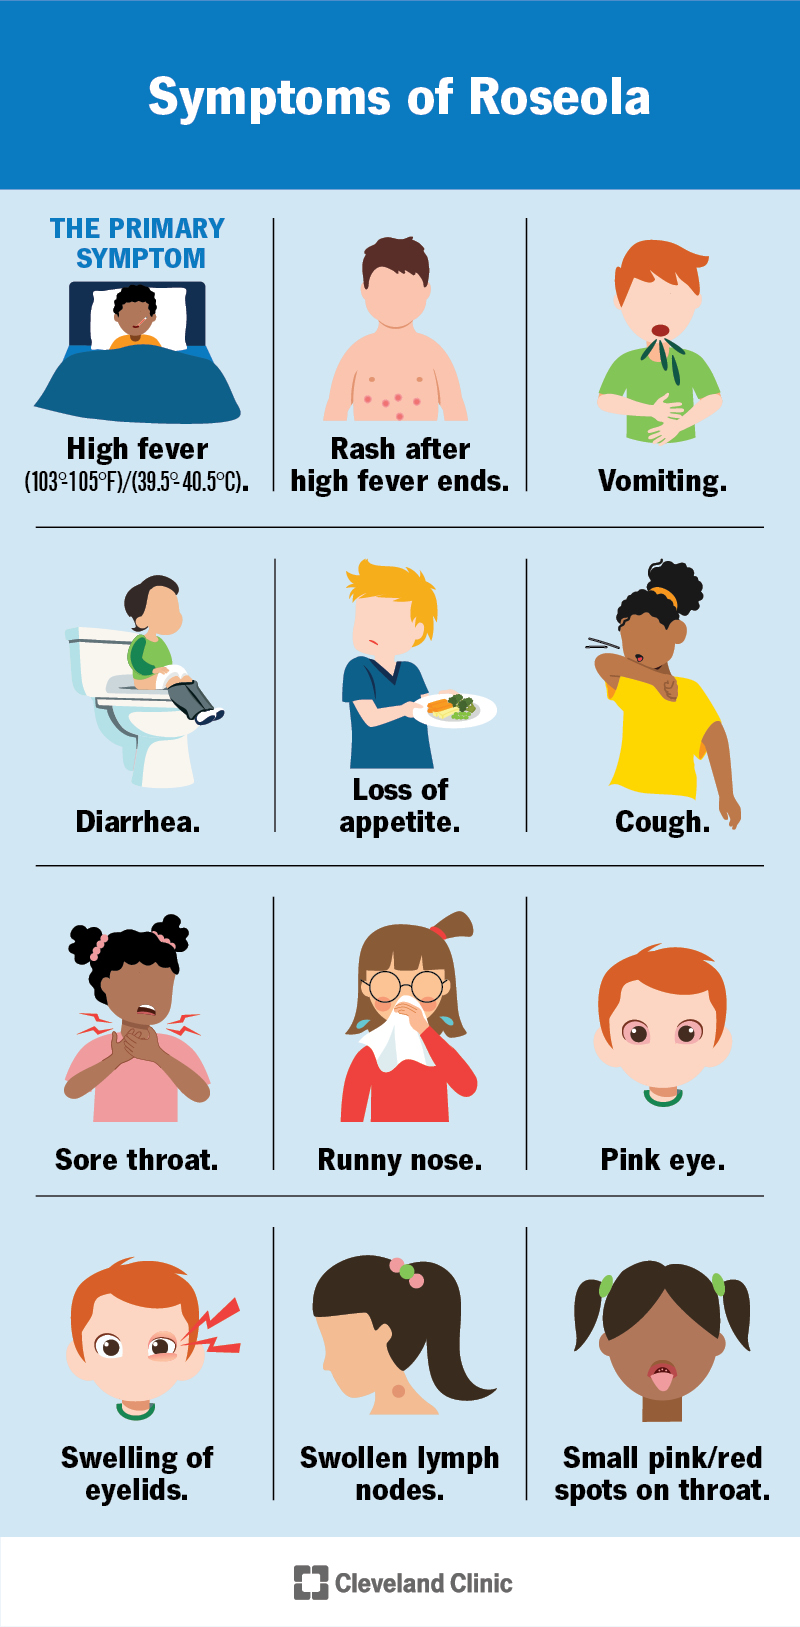 Infographic showing the primary symptom of roseola (a high fever) along with many other possible symptoms.